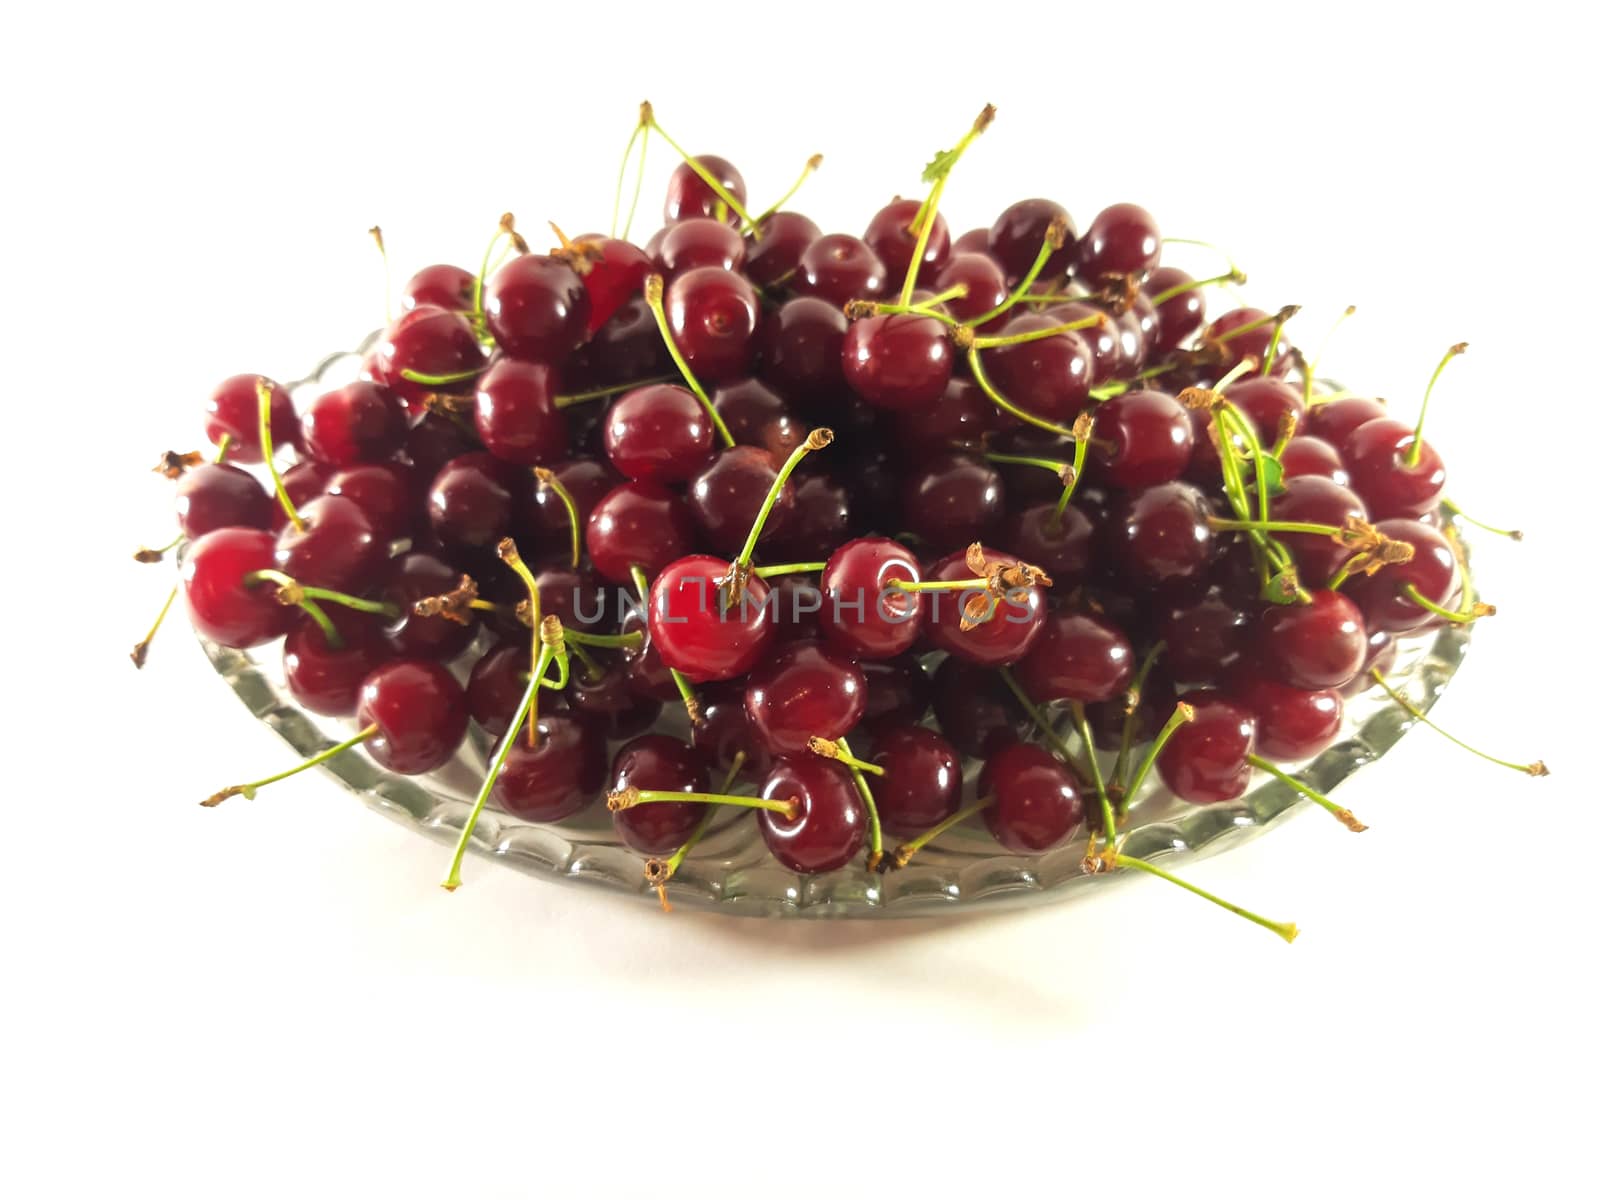 Photo cherry on a transparent plate. Healthy food. Vegetarian red food. Berries and fruits. Berry for snack. 